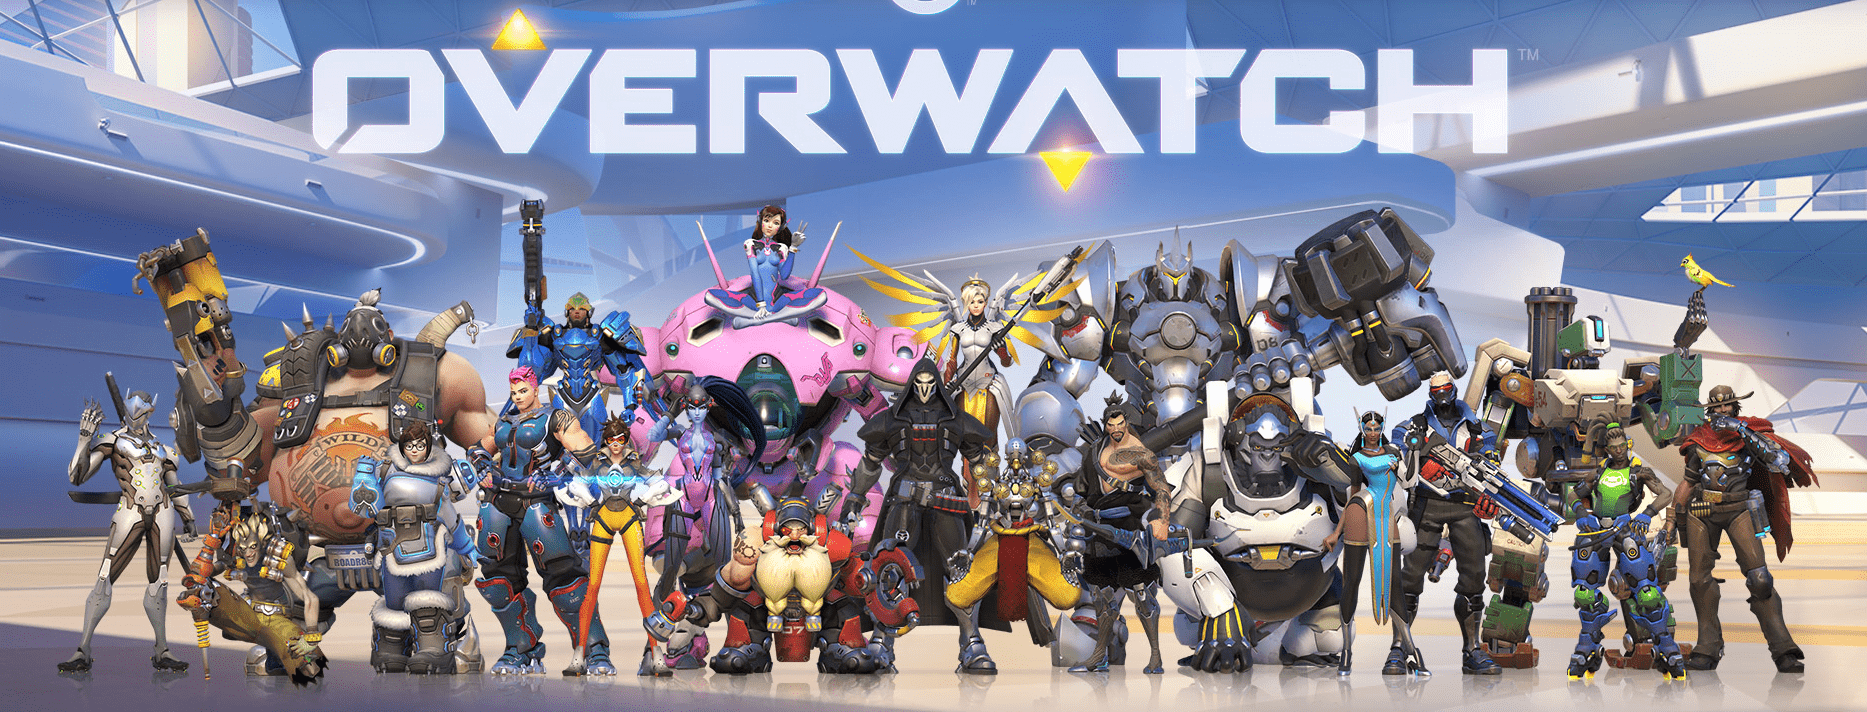 Overwatch Update 2.66 Full Patch Notes Full Details Here